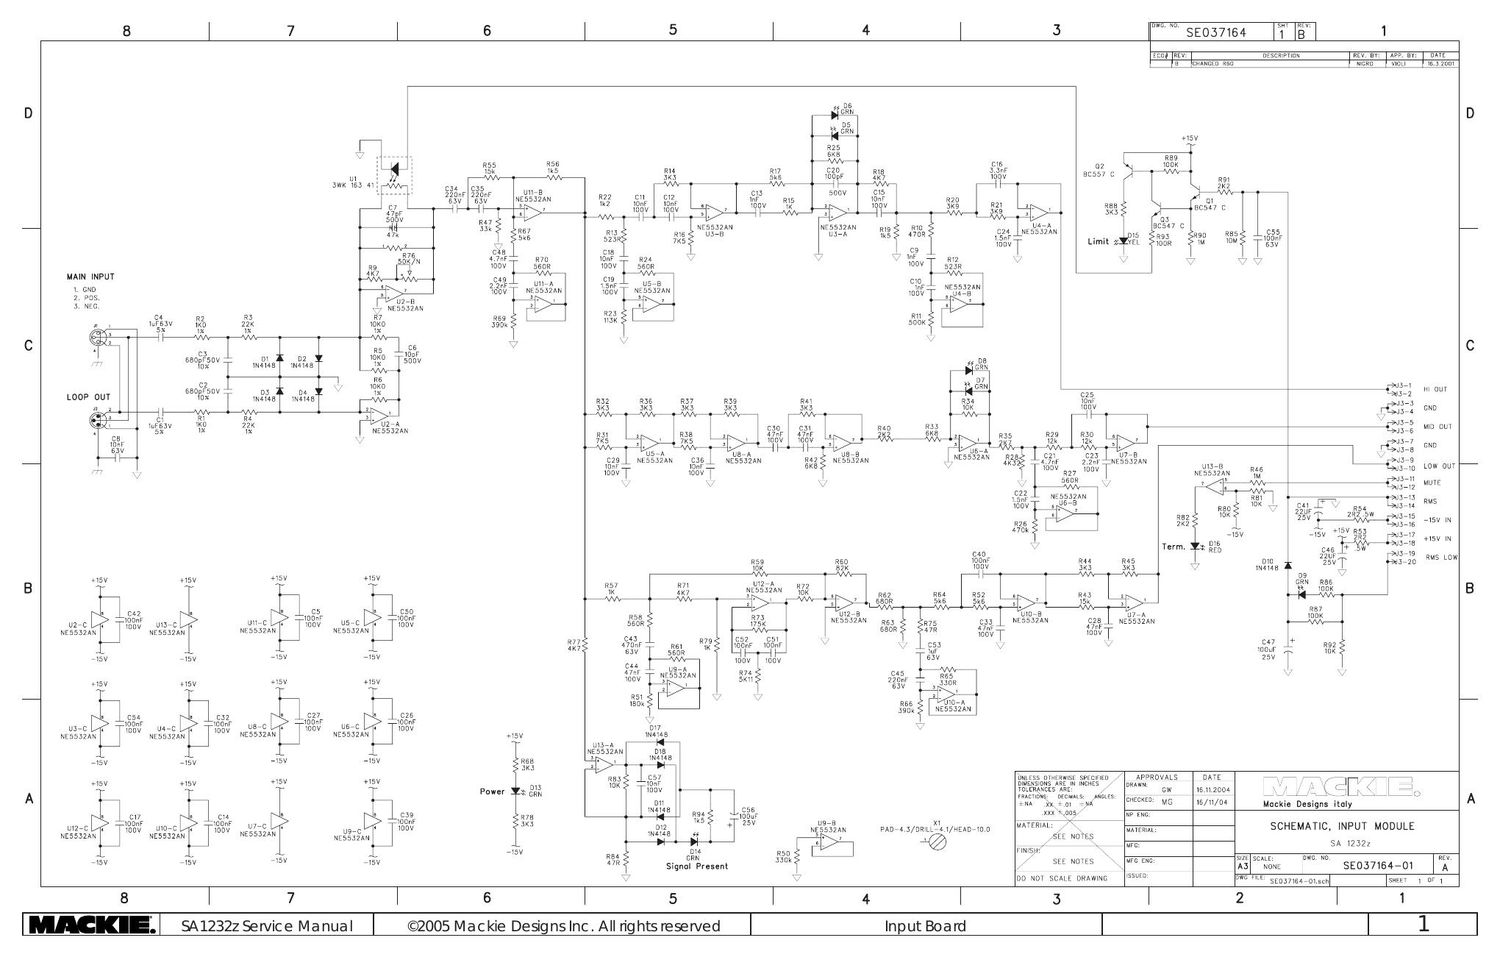 mackie SA1232 Input PCB Assembly Schematics and Layout